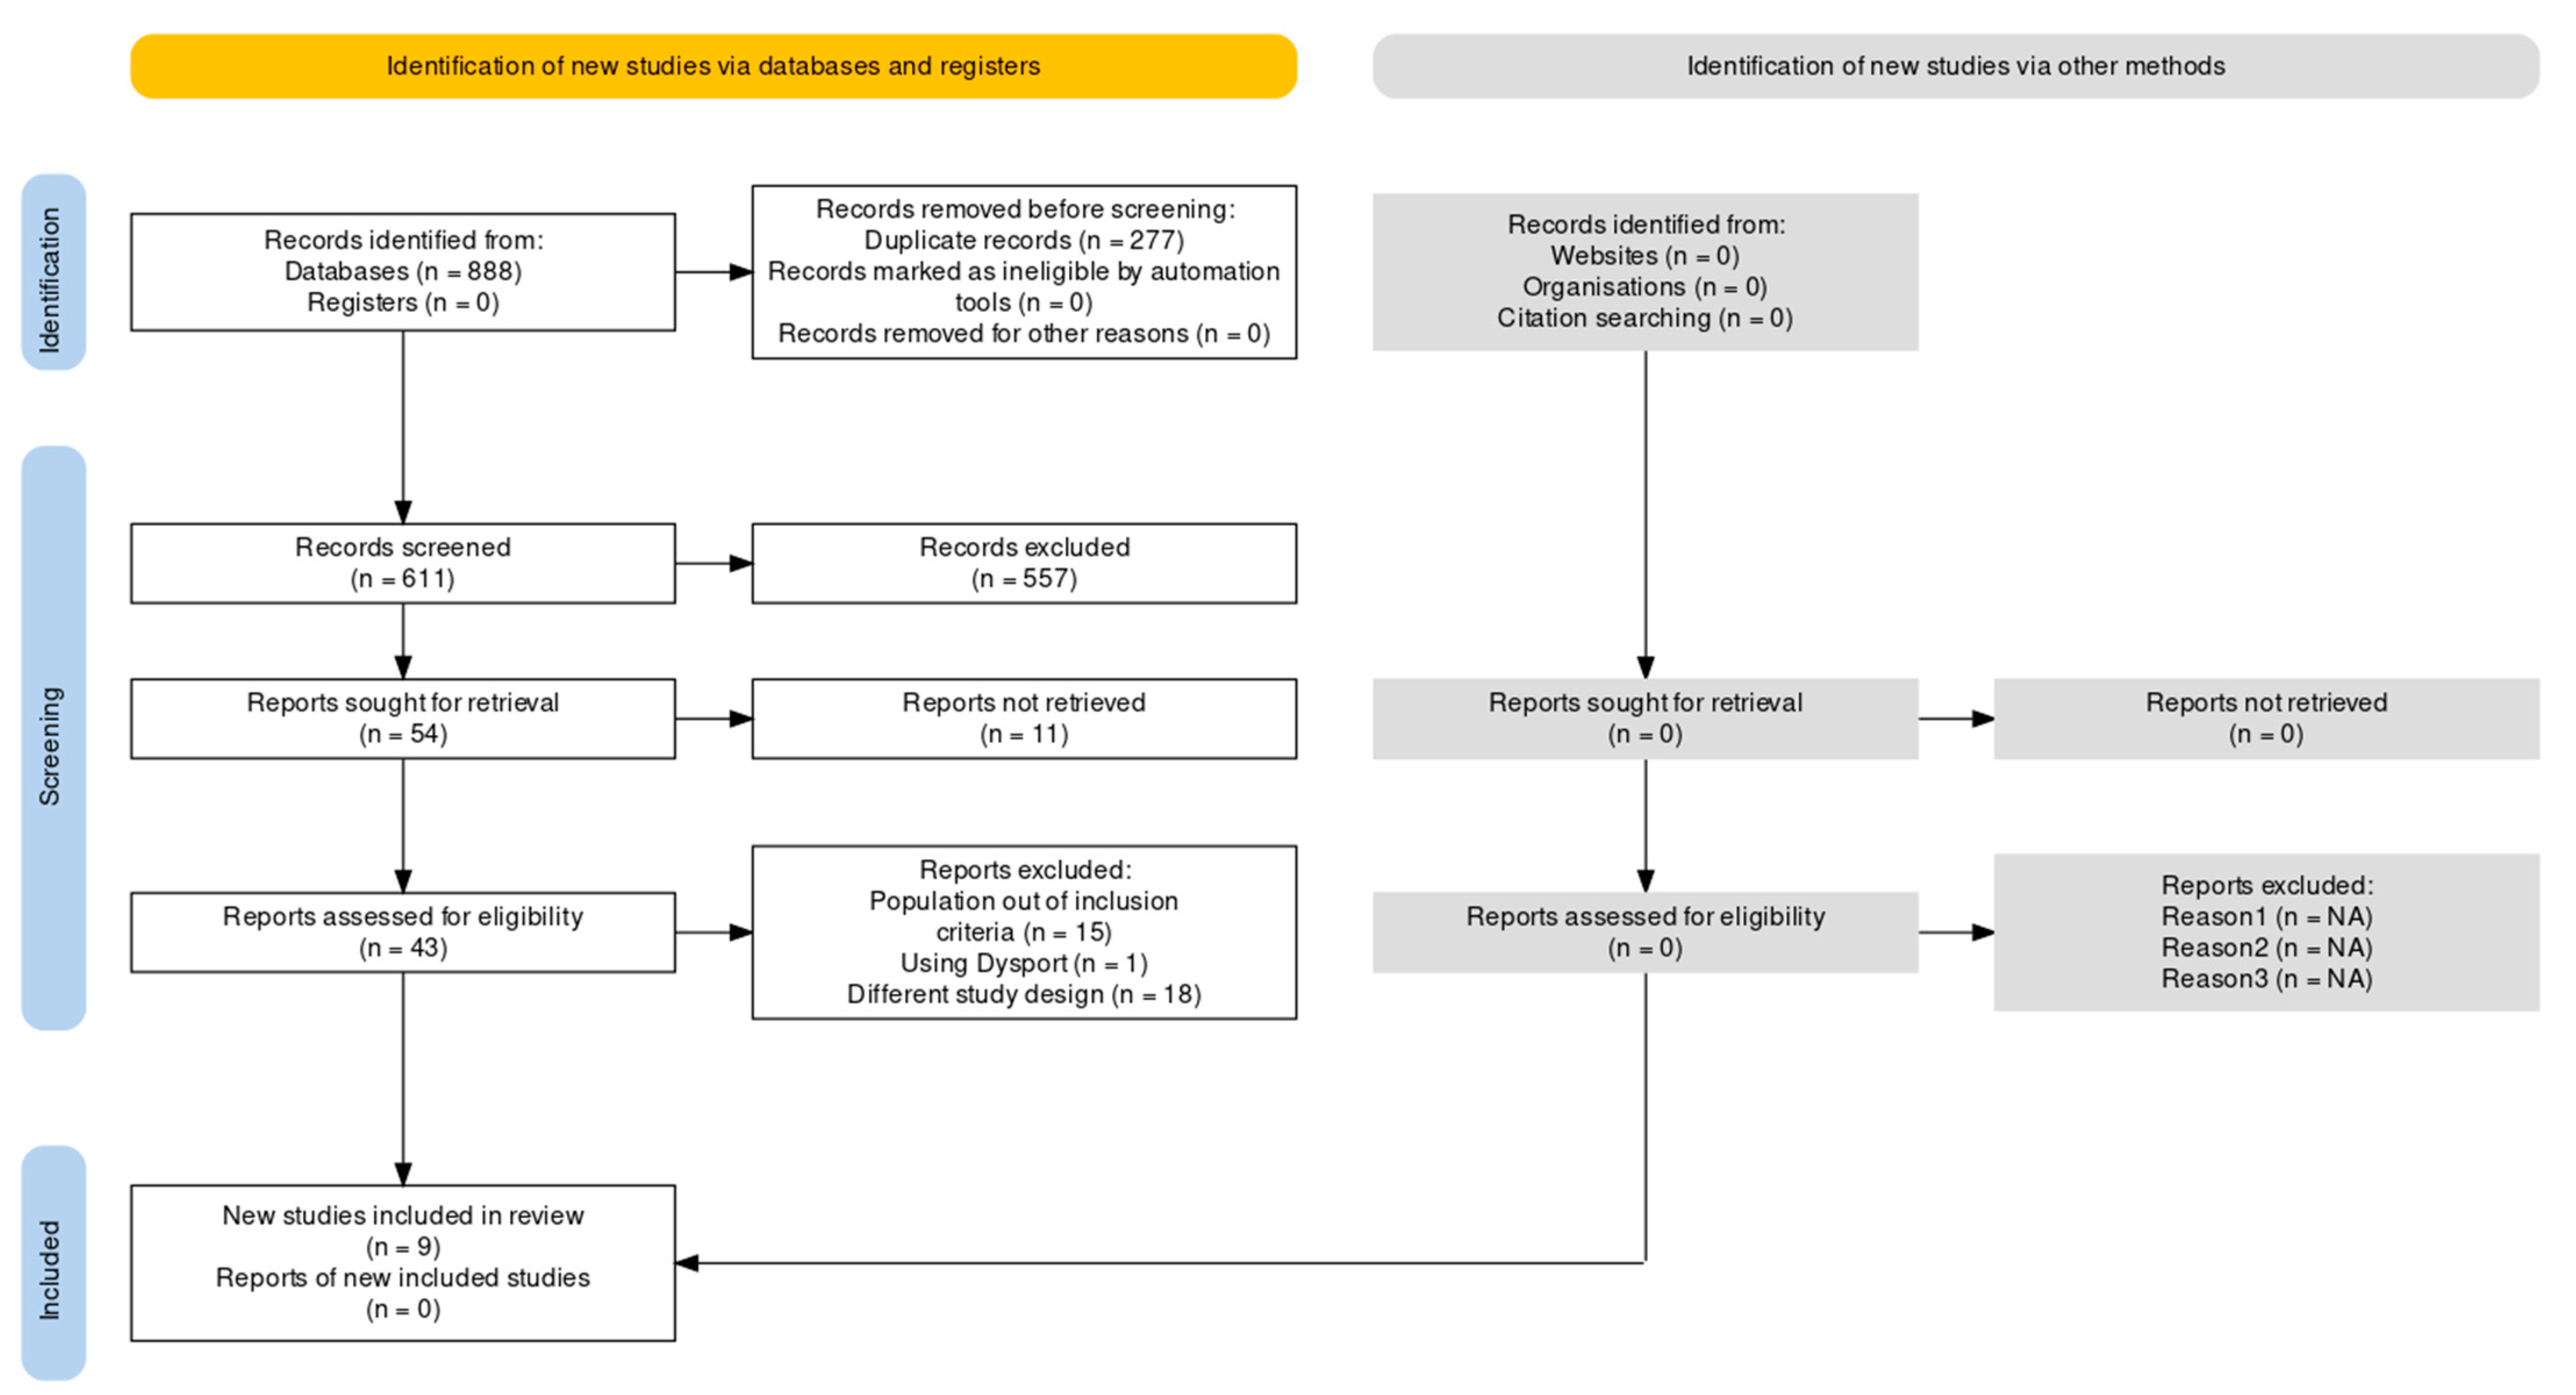 Toxins | Free Full-Text | Safety of Onabotulinumtoxin A in Chronic  Migraine: A Systematic Review and Meta-Analysis of Randomized Clinical  Trials